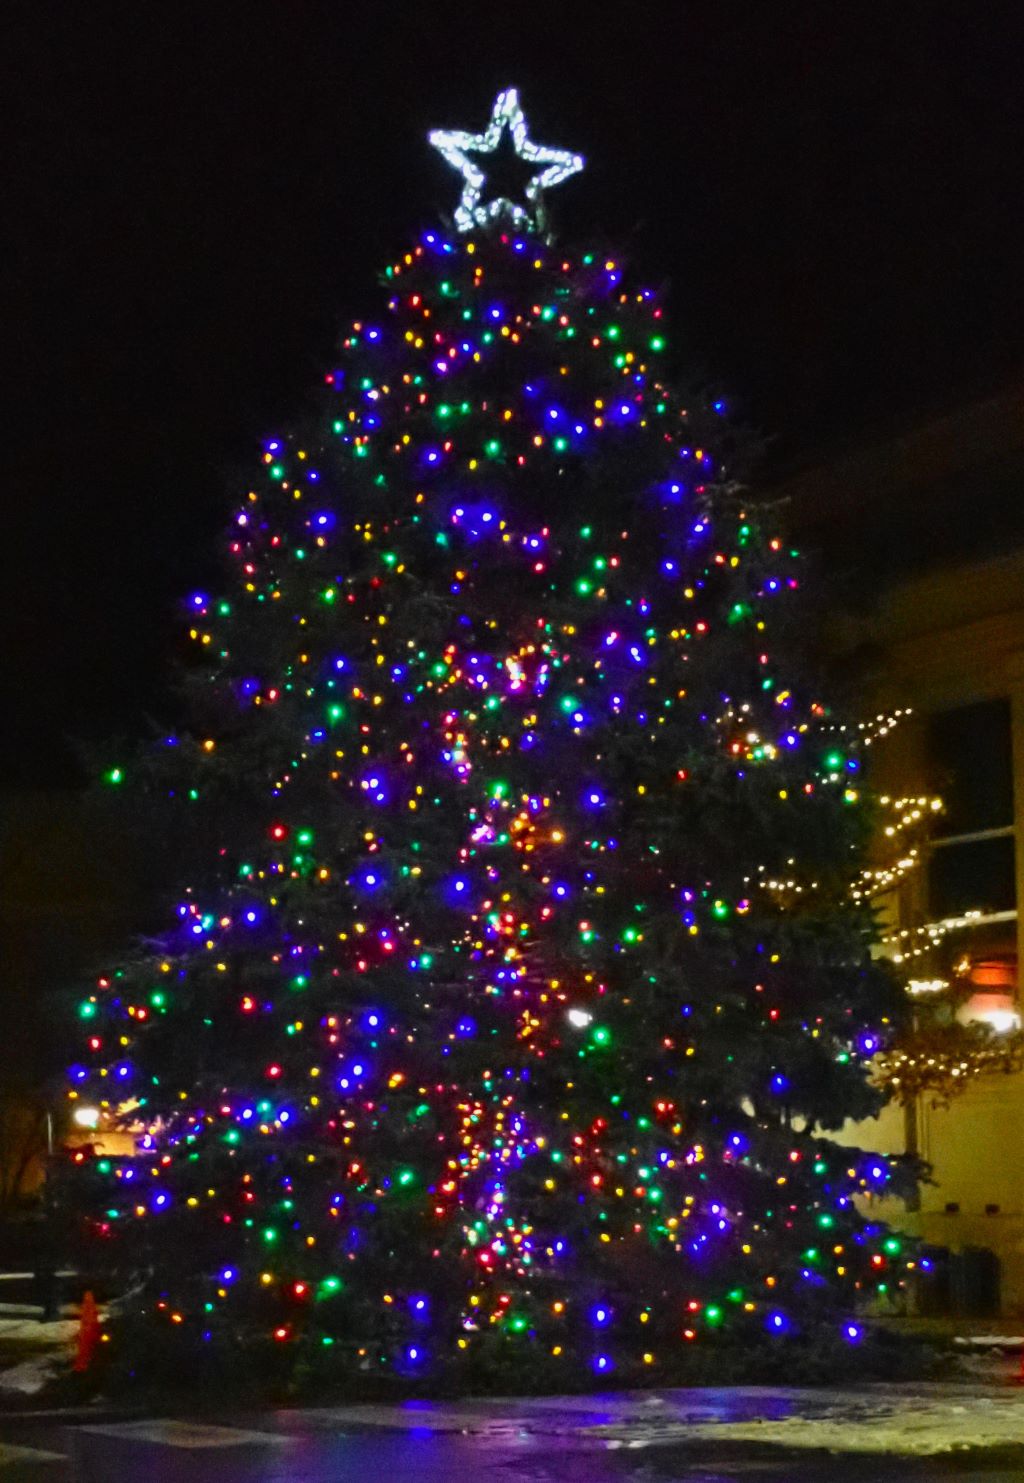 The lighted Christmas tree in downtown Traverse City